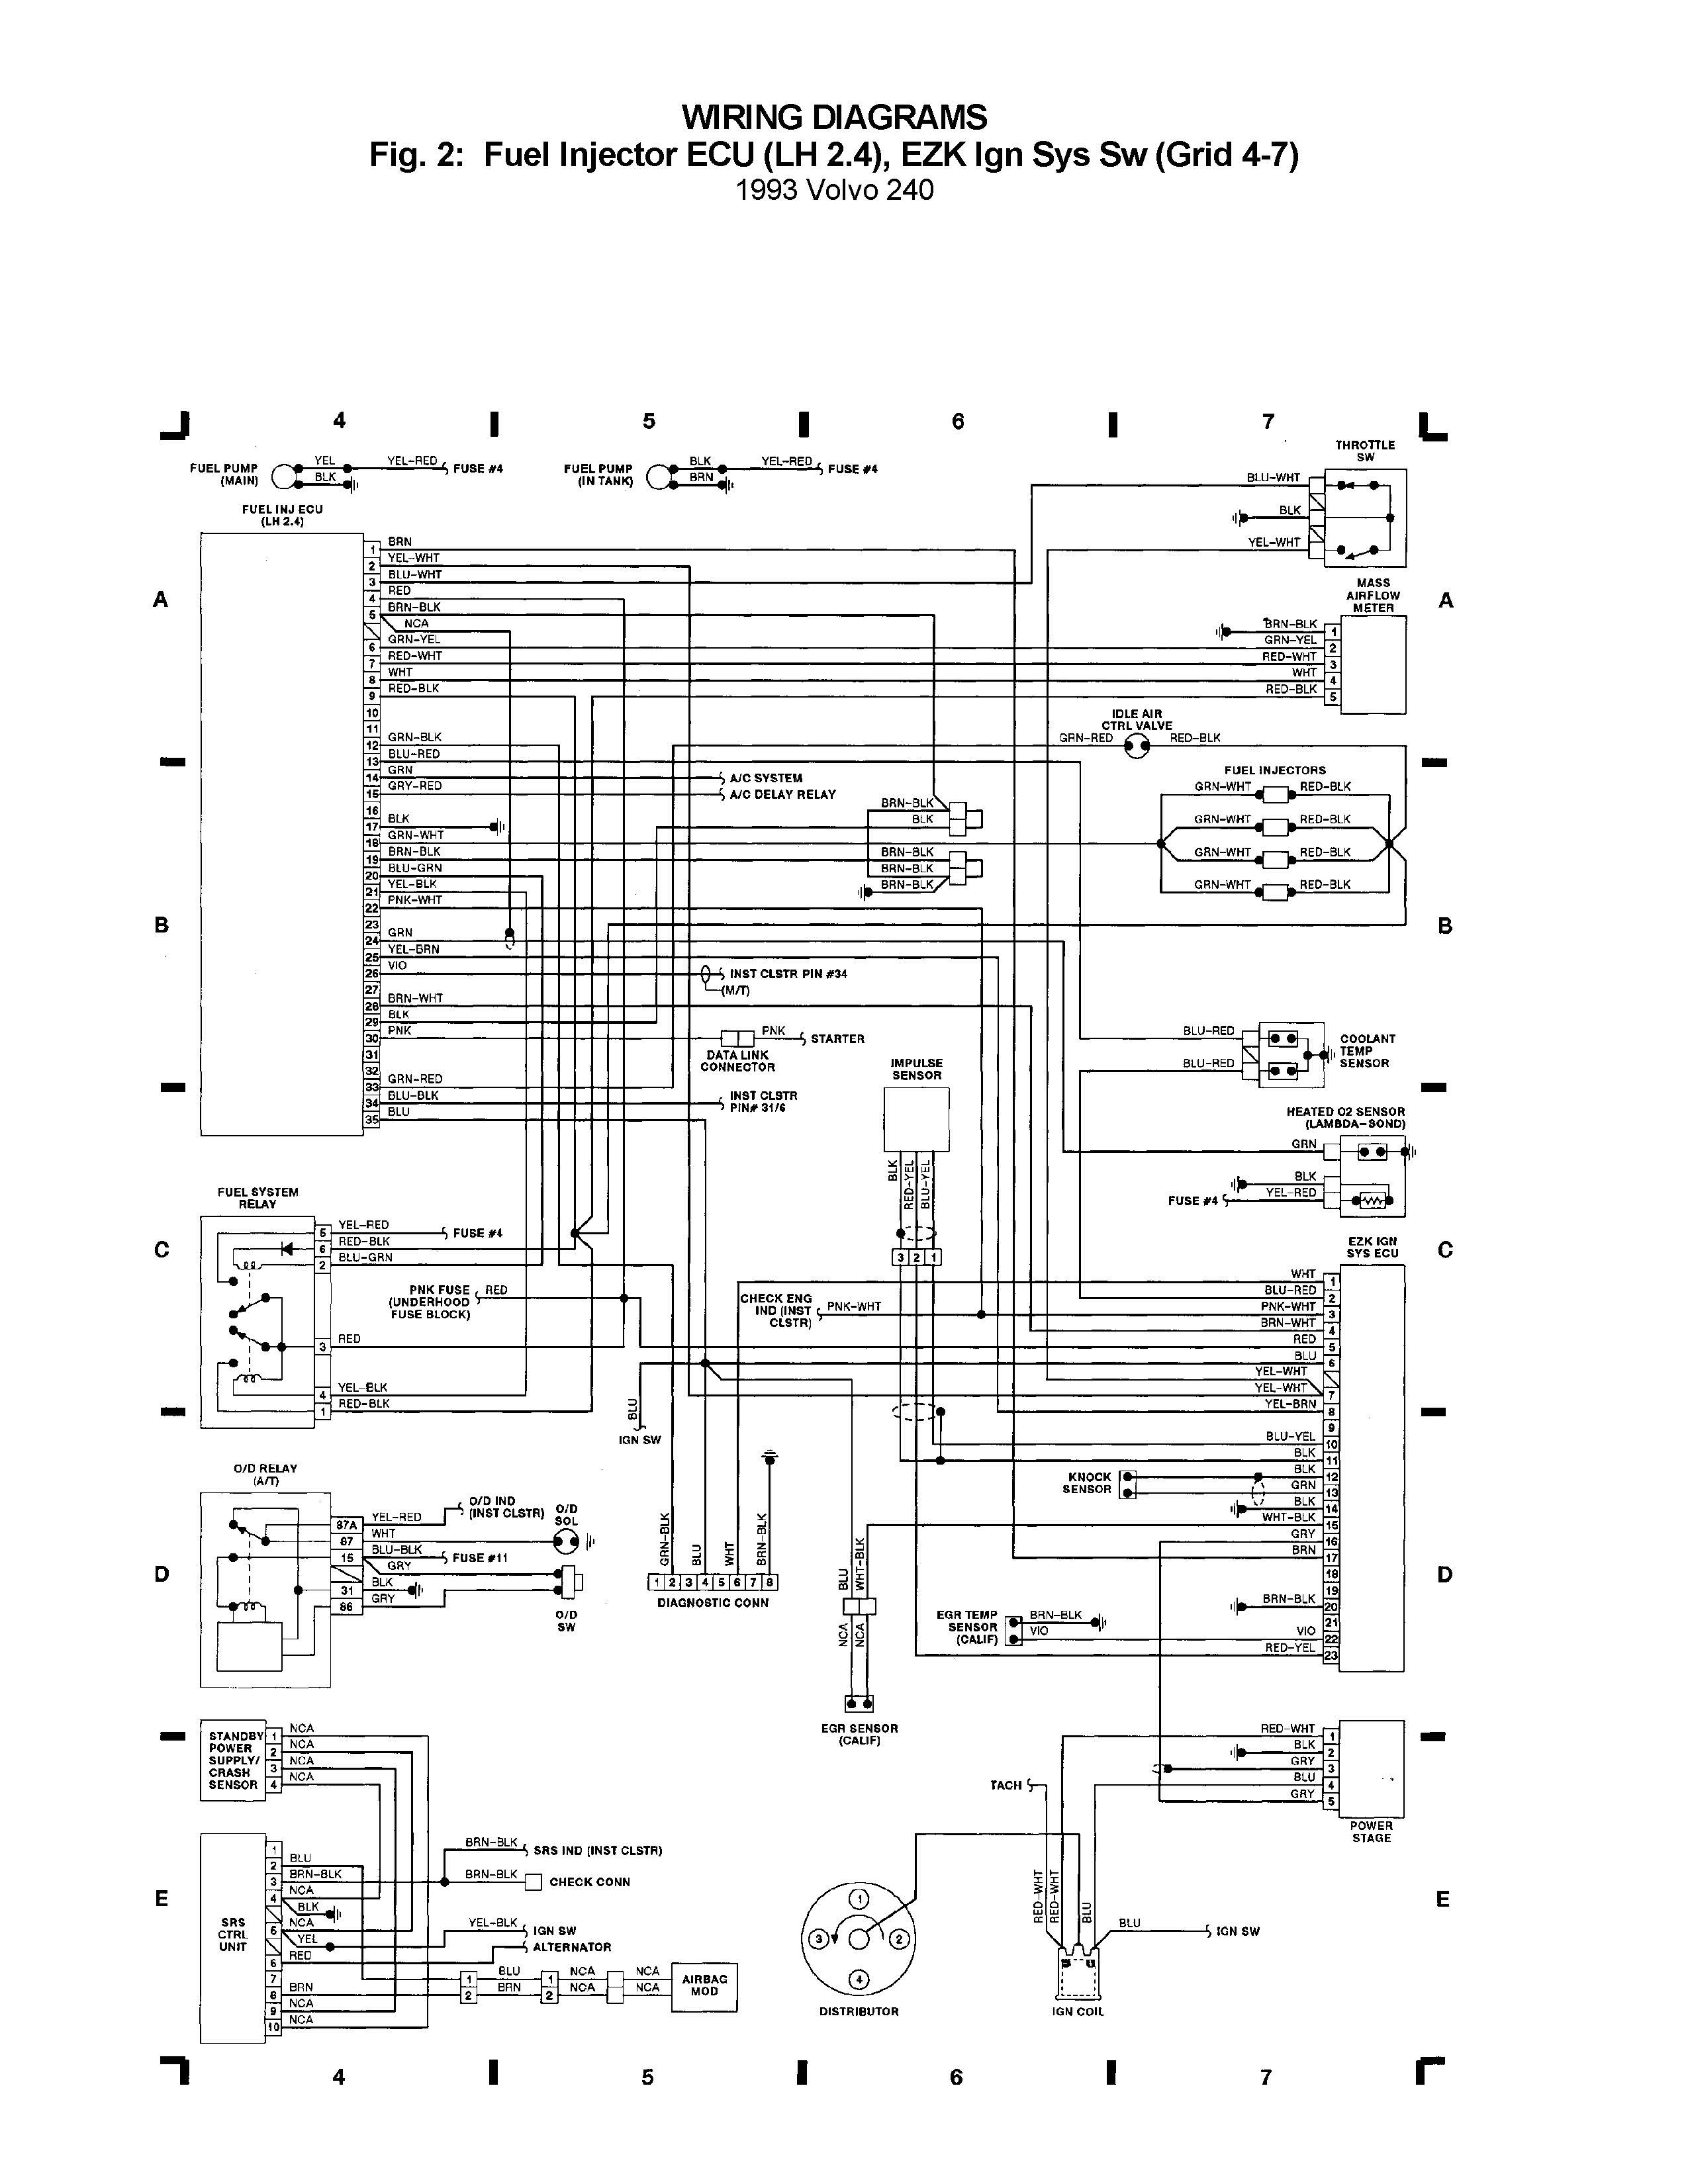 Volvo 240  1993  - Wiring Diagrams